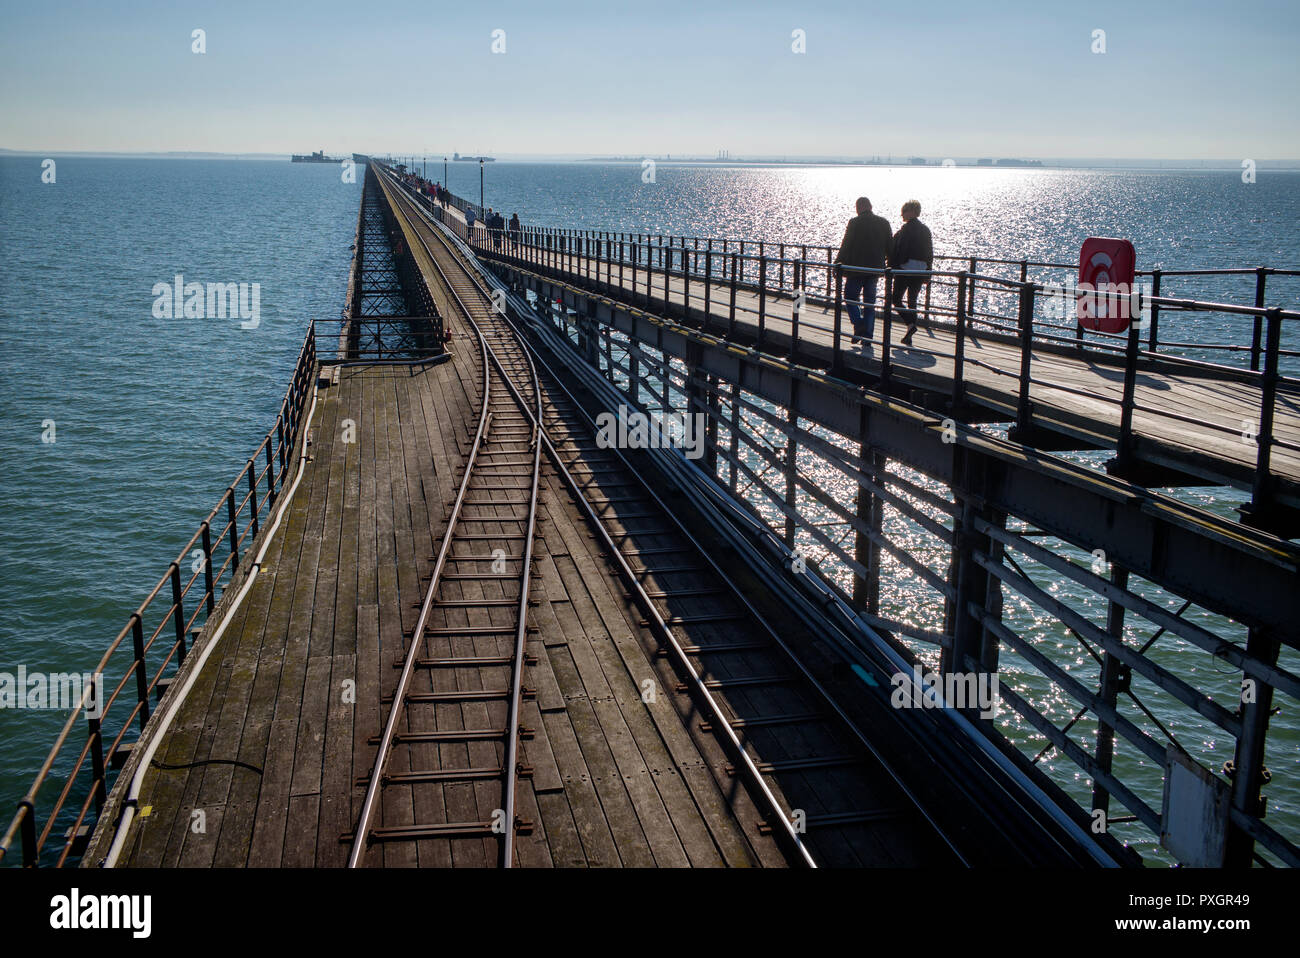 Southend on Sea, Essex, England, UK. Oct 2018 Southend Pier is a major landmark in Southend-on-Sea. Extending 1.34 miles (2.16 km) into the Thames Est Stock Photo